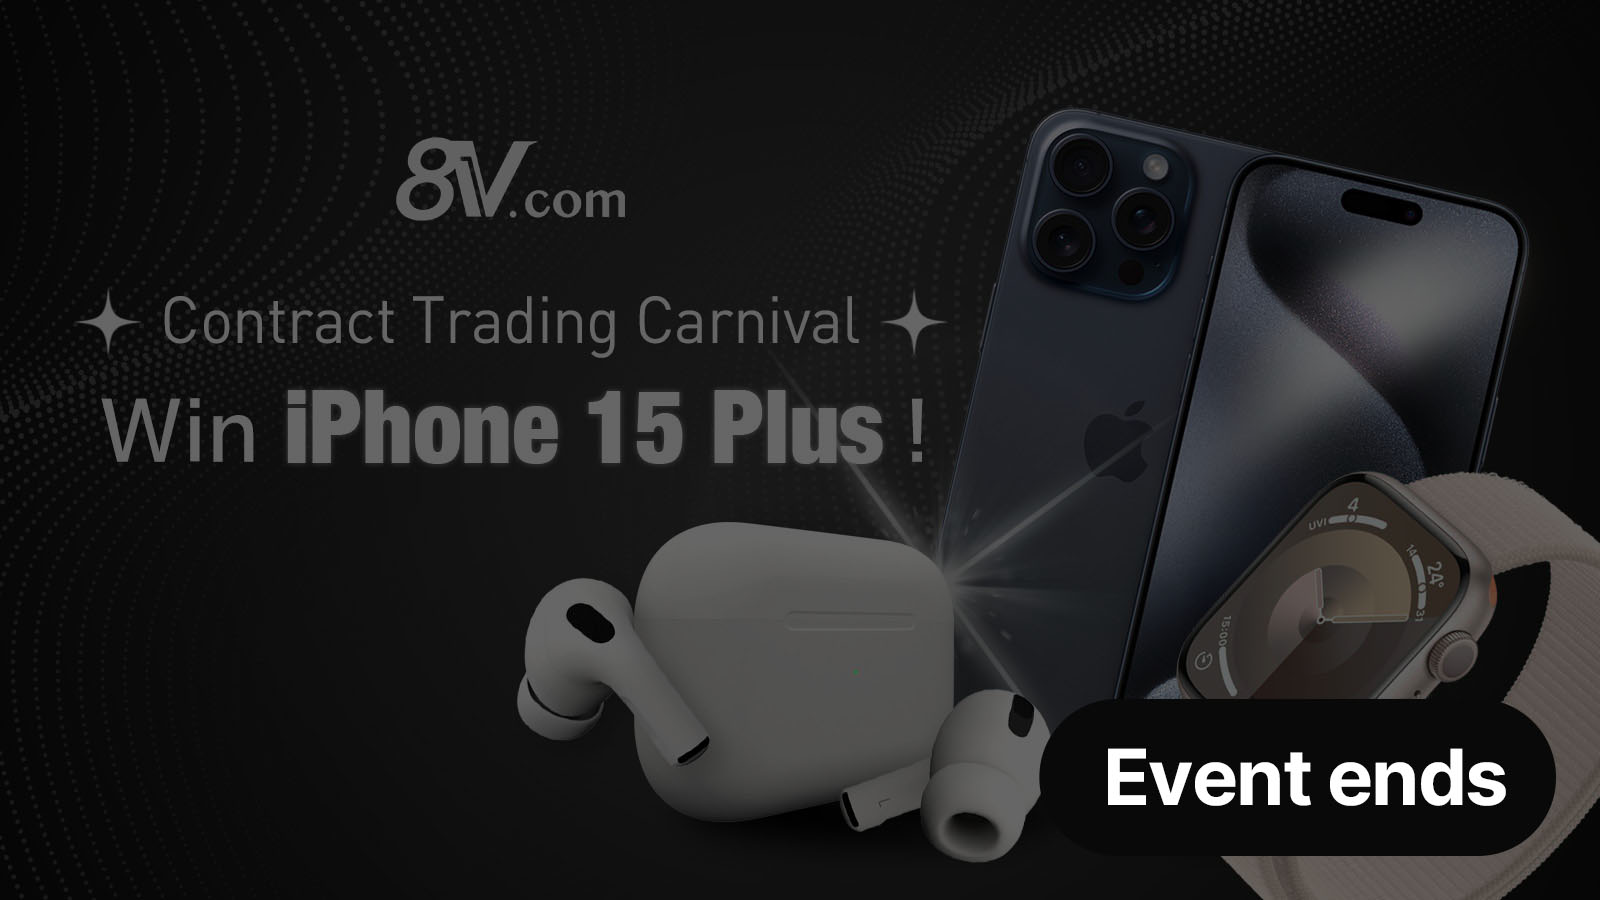 “Contract Trading Carnival: Win iPhone 15 Plus!” event ended